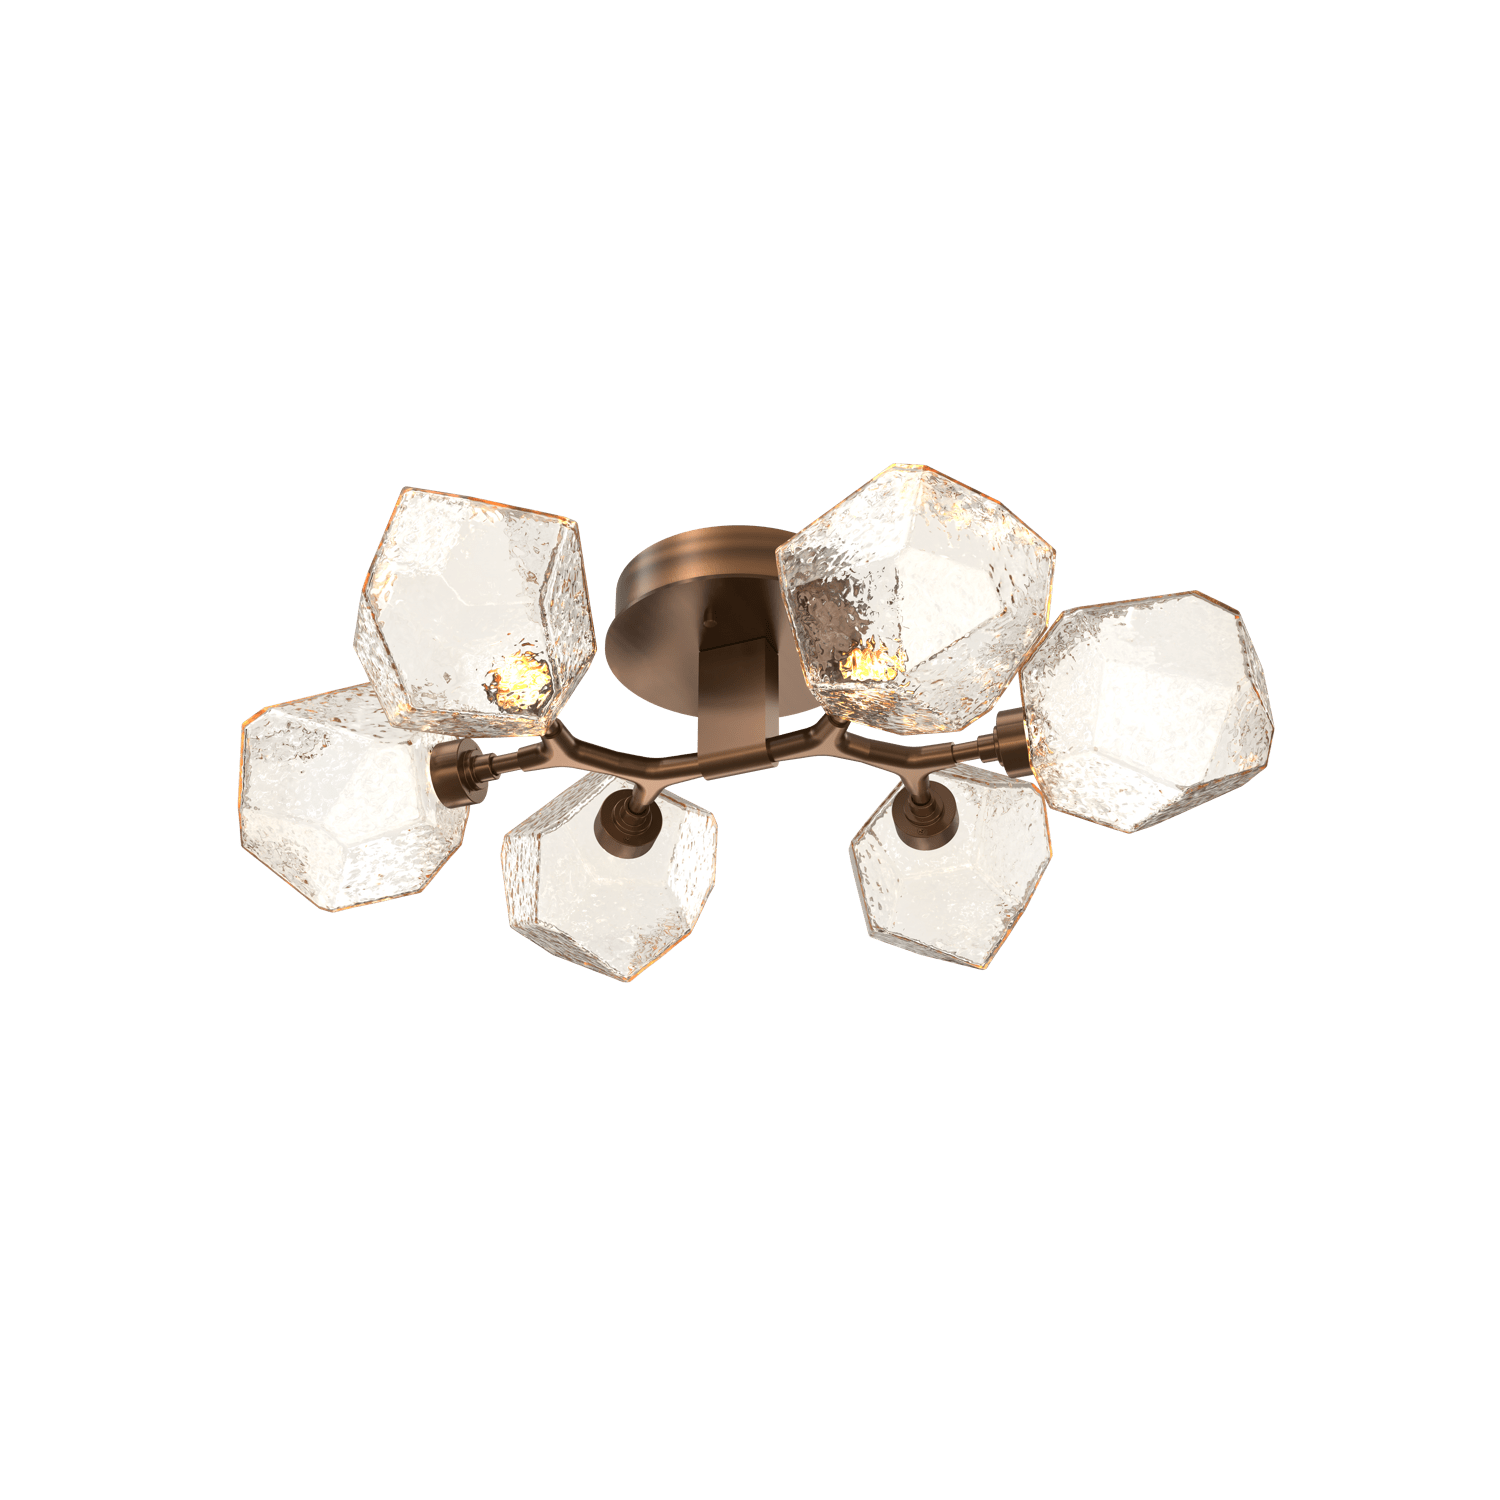 CLB0039-01-RB-A-Hammerton-Studio-Gem-6-light-organic-flush-mount-light-with-oil-rubbed-bronze-finish-and-amber-blown-glass-shades-and-LED-lamping